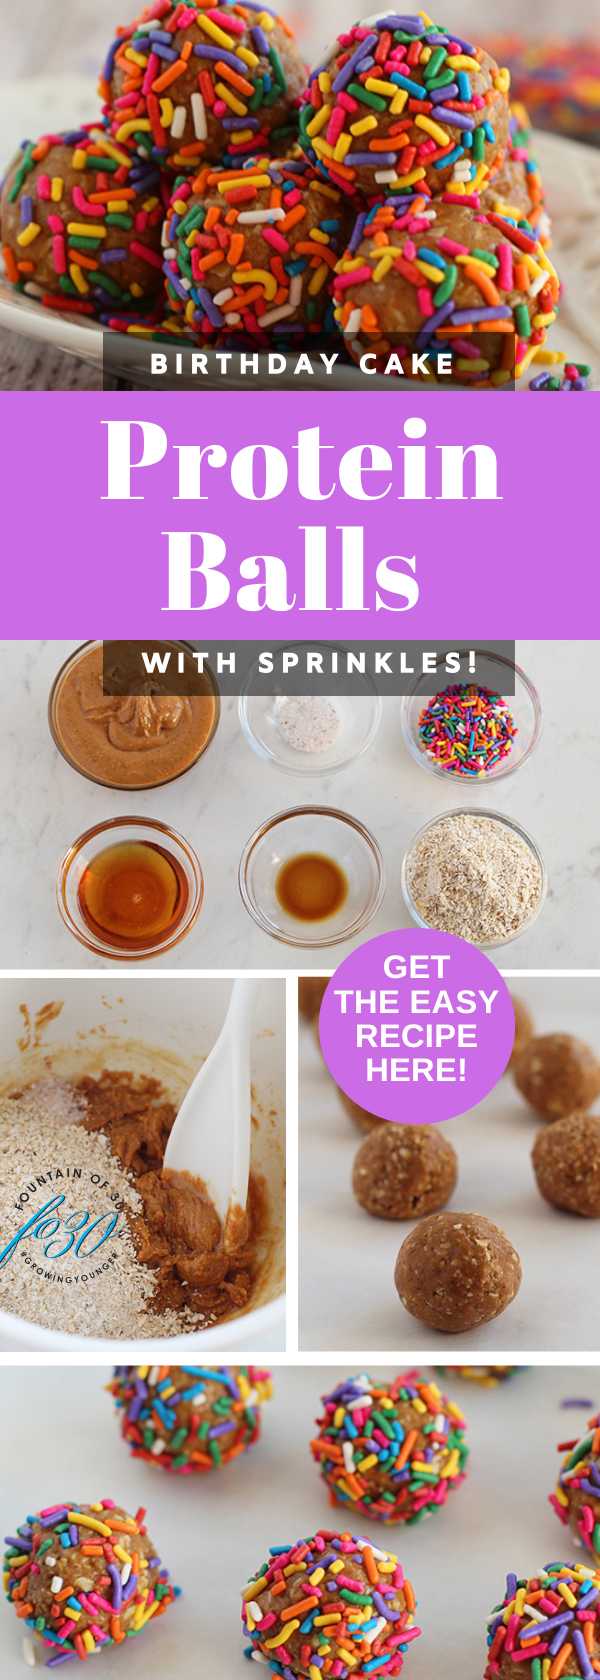 easy protein balls recipe with sprinkles fountainof30